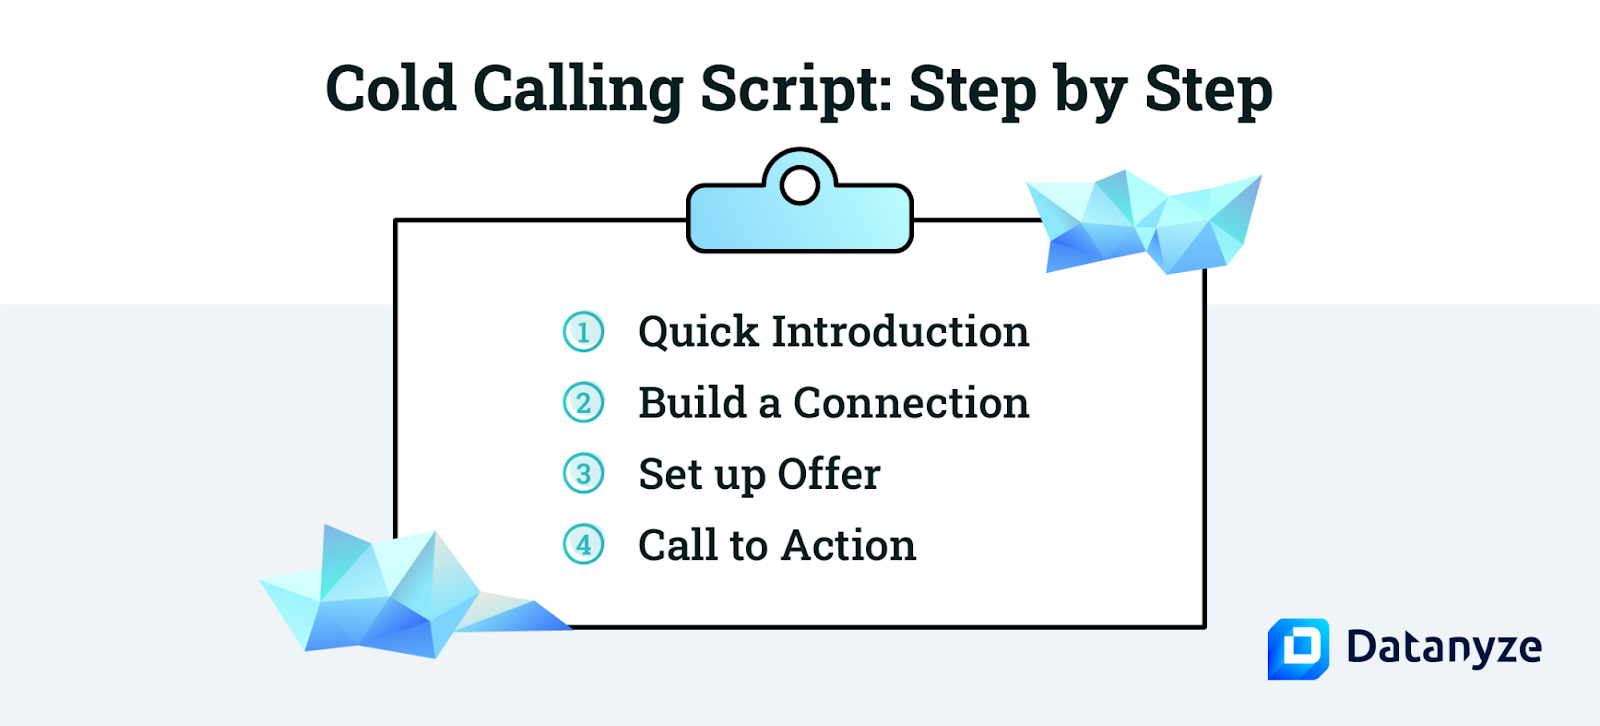 Cold Calling Script step by step